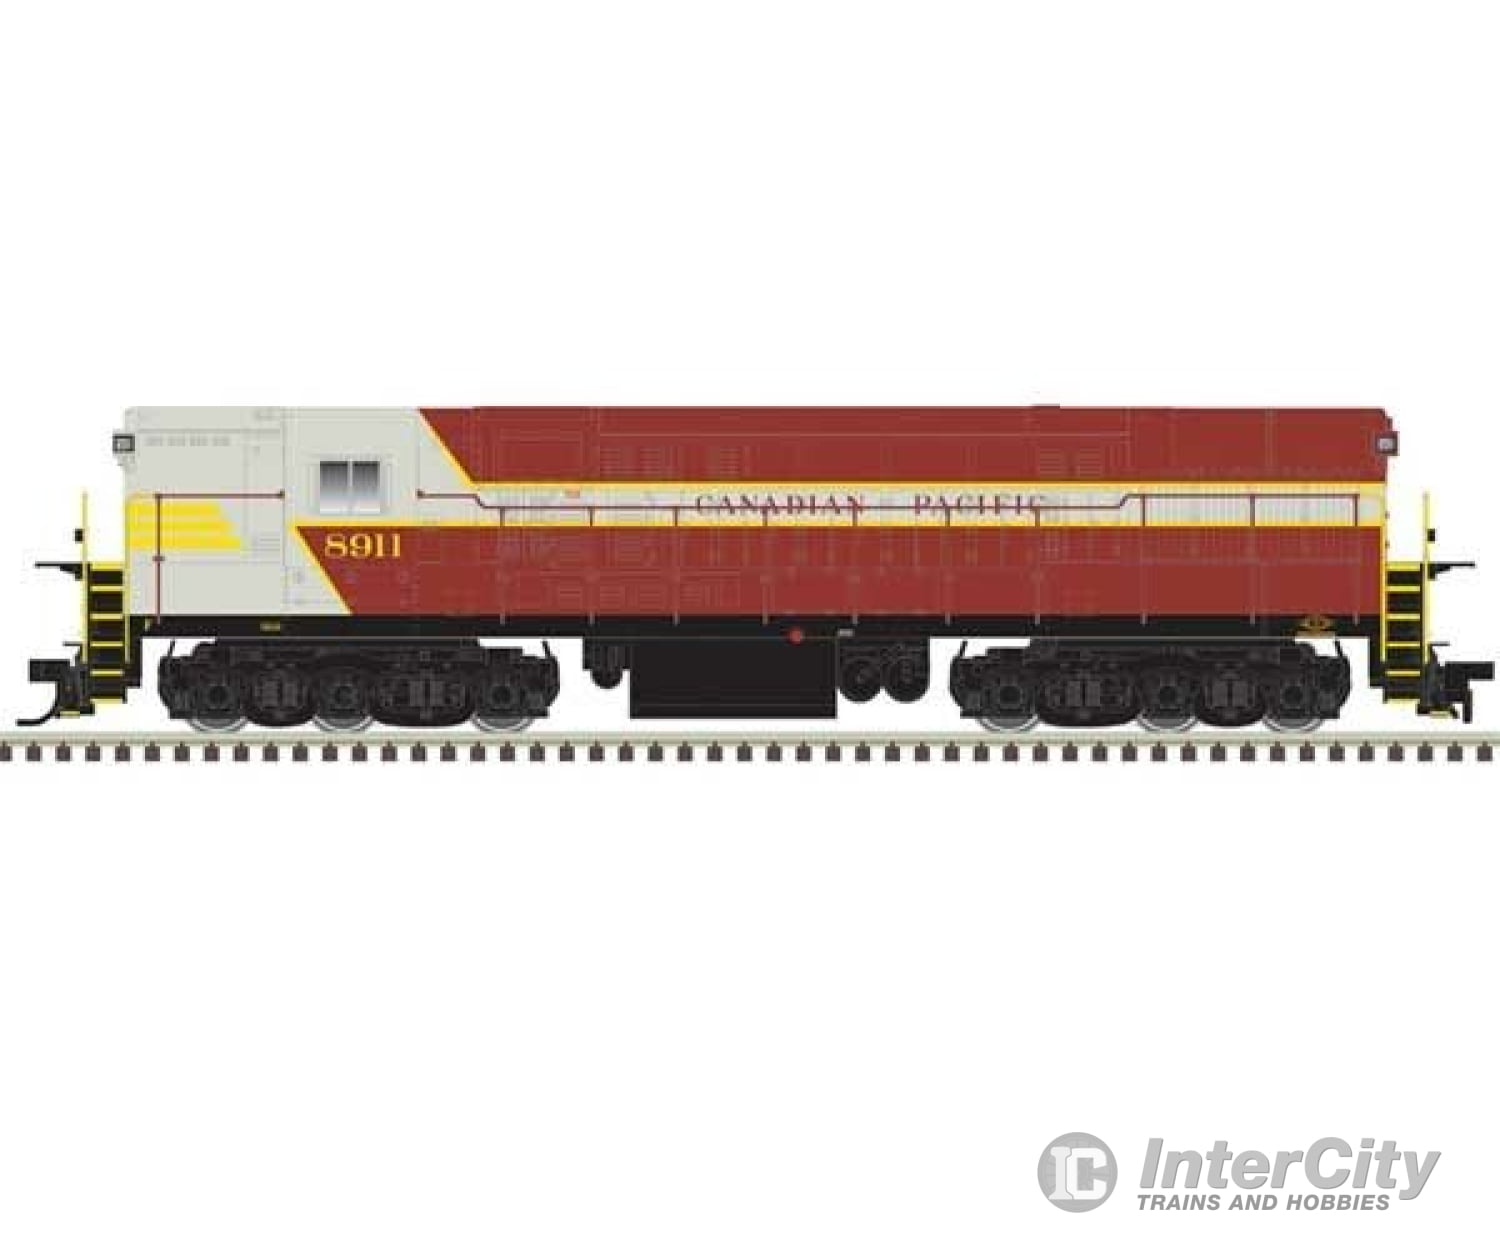 Atlas 40005416 Fm H-24-66 Phase 2 Trainmaster - Loksound & Dcc -- Canadian Pacific #8911 (Late